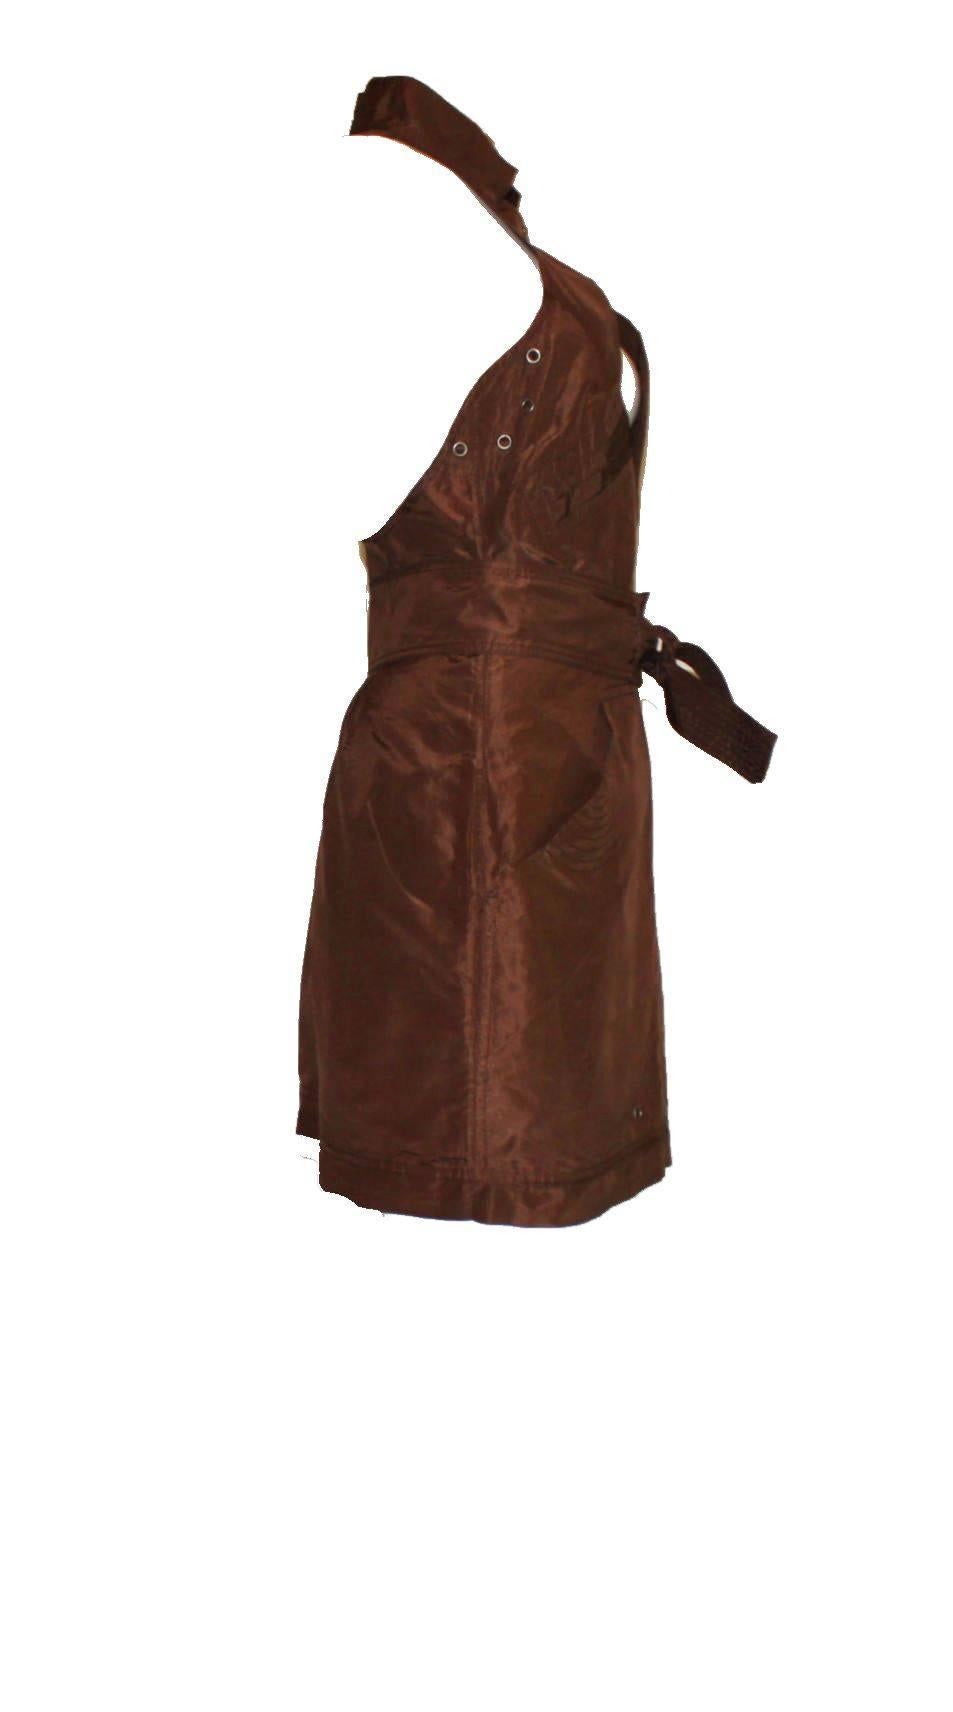 Stunning Chocolate Brown Taffeta Dress
By Tom Ford for Gucci Spring 2003
The same dress was shown on the runway
Shiny charging brown taffeta silk 
Beautiful dress with racer back
Deep plunge 
Attached belt 
Zip and small studs discreetly